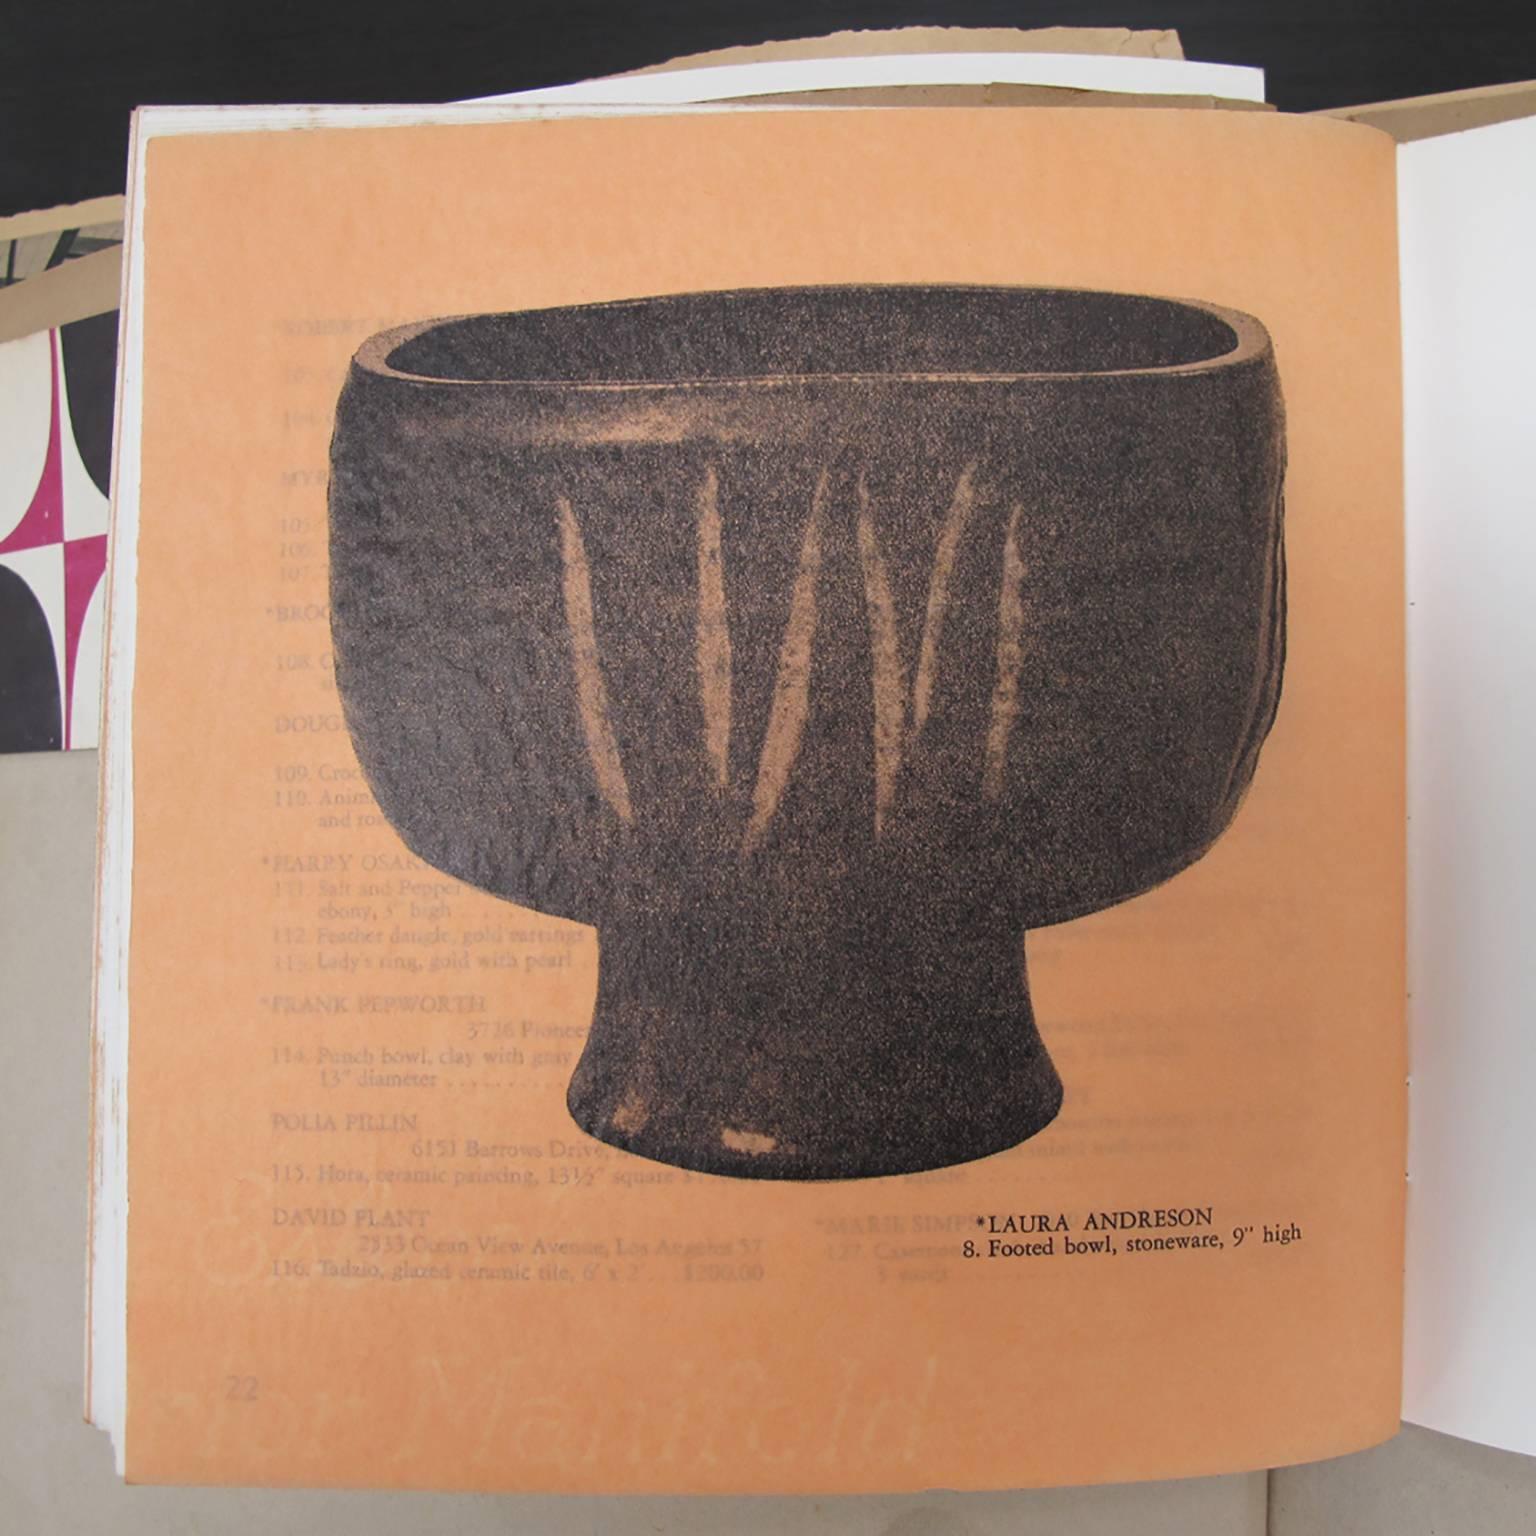 Laura Andreson 'Footed Bowl' Ceramic, 1956 In Excellent Condition For Sale In Los Angeles, CA